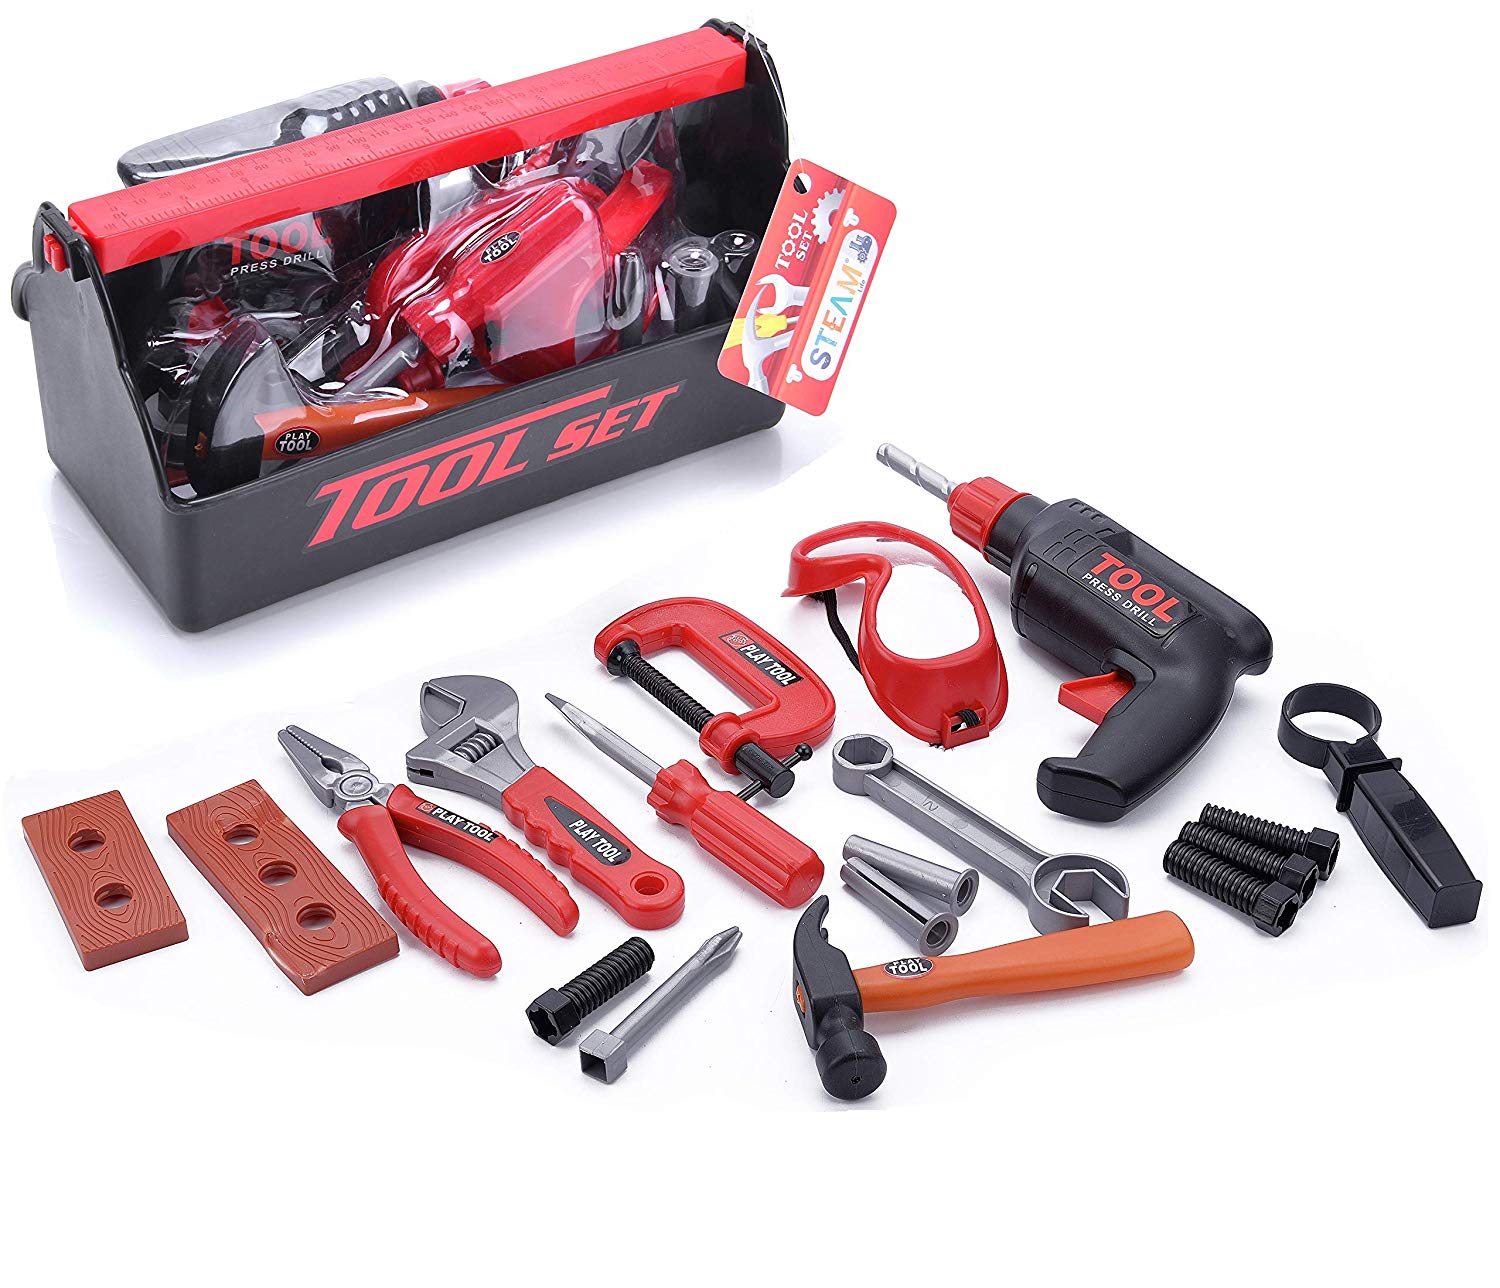 toy tools for 2 year old